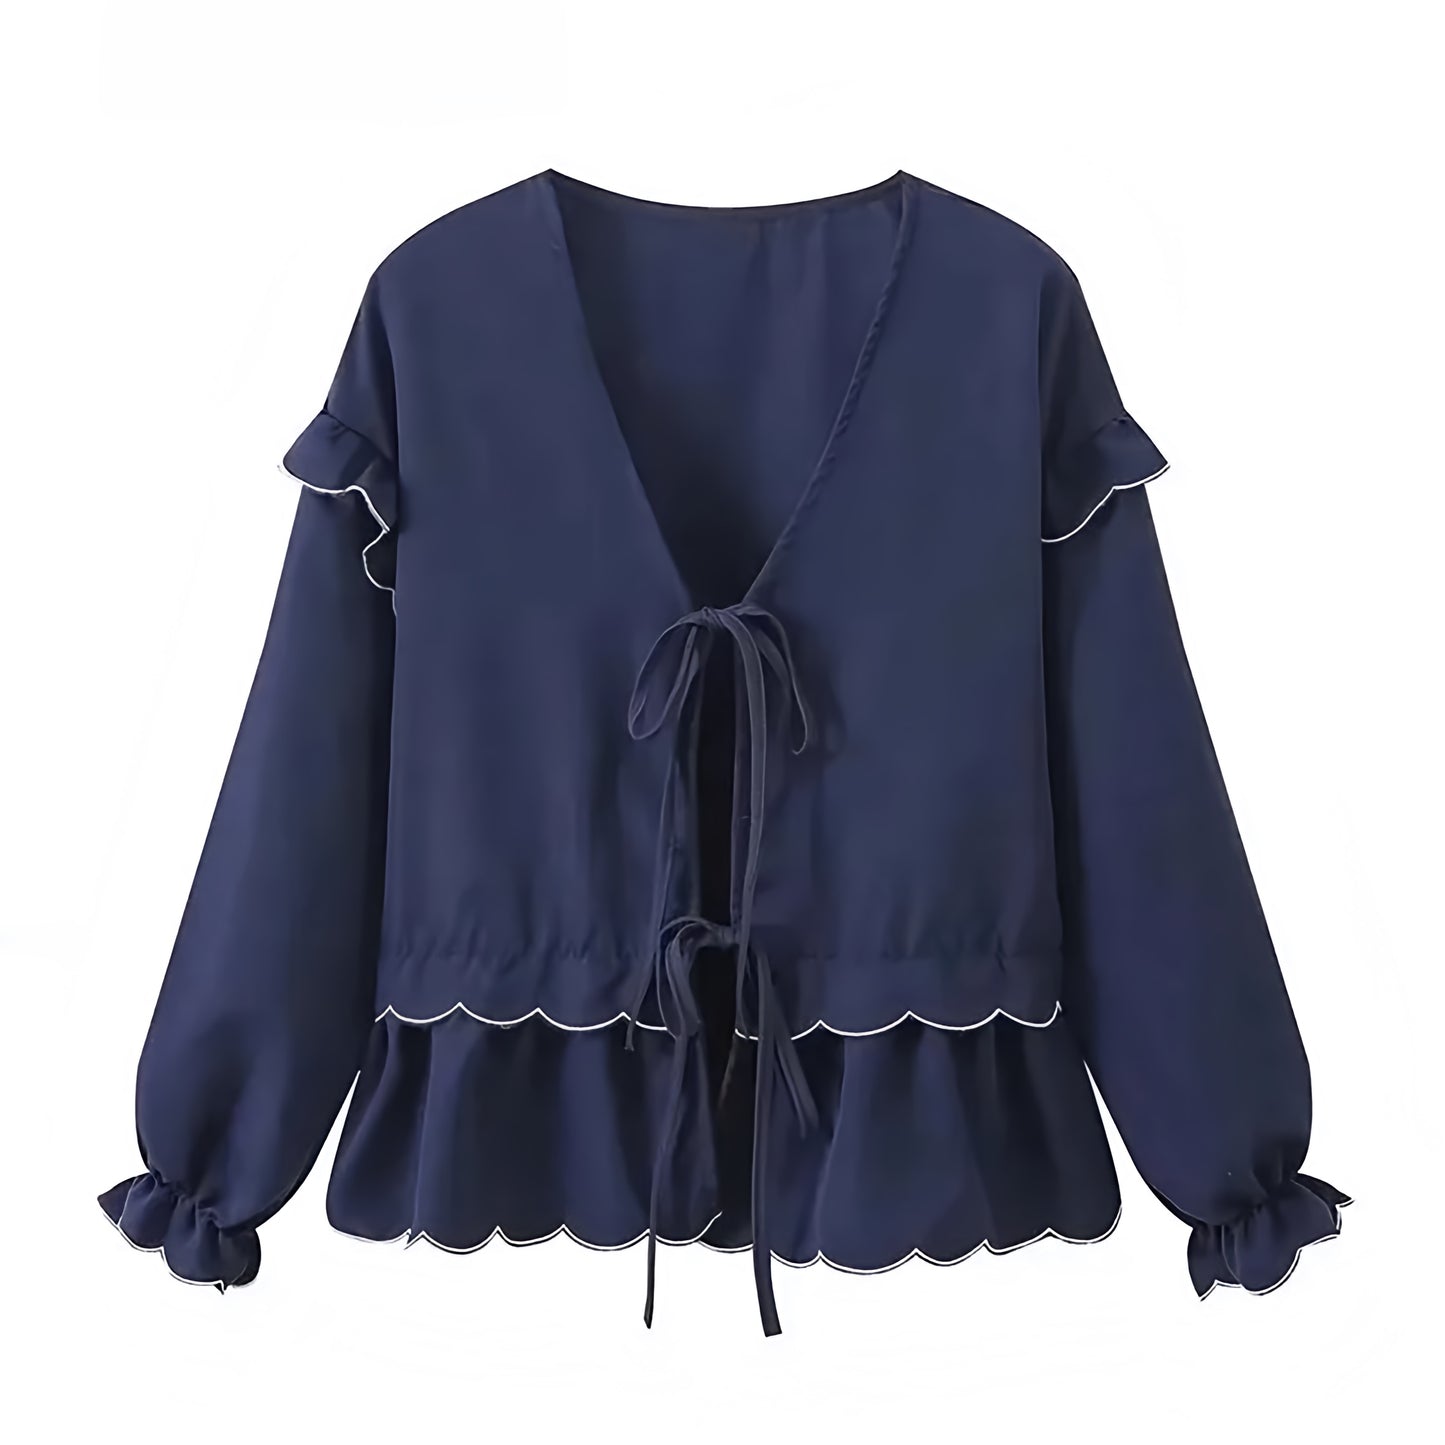 Navy Blue Bow Lace-Up Ruffle Trim V-Neck Long Sleeve Blouse Top